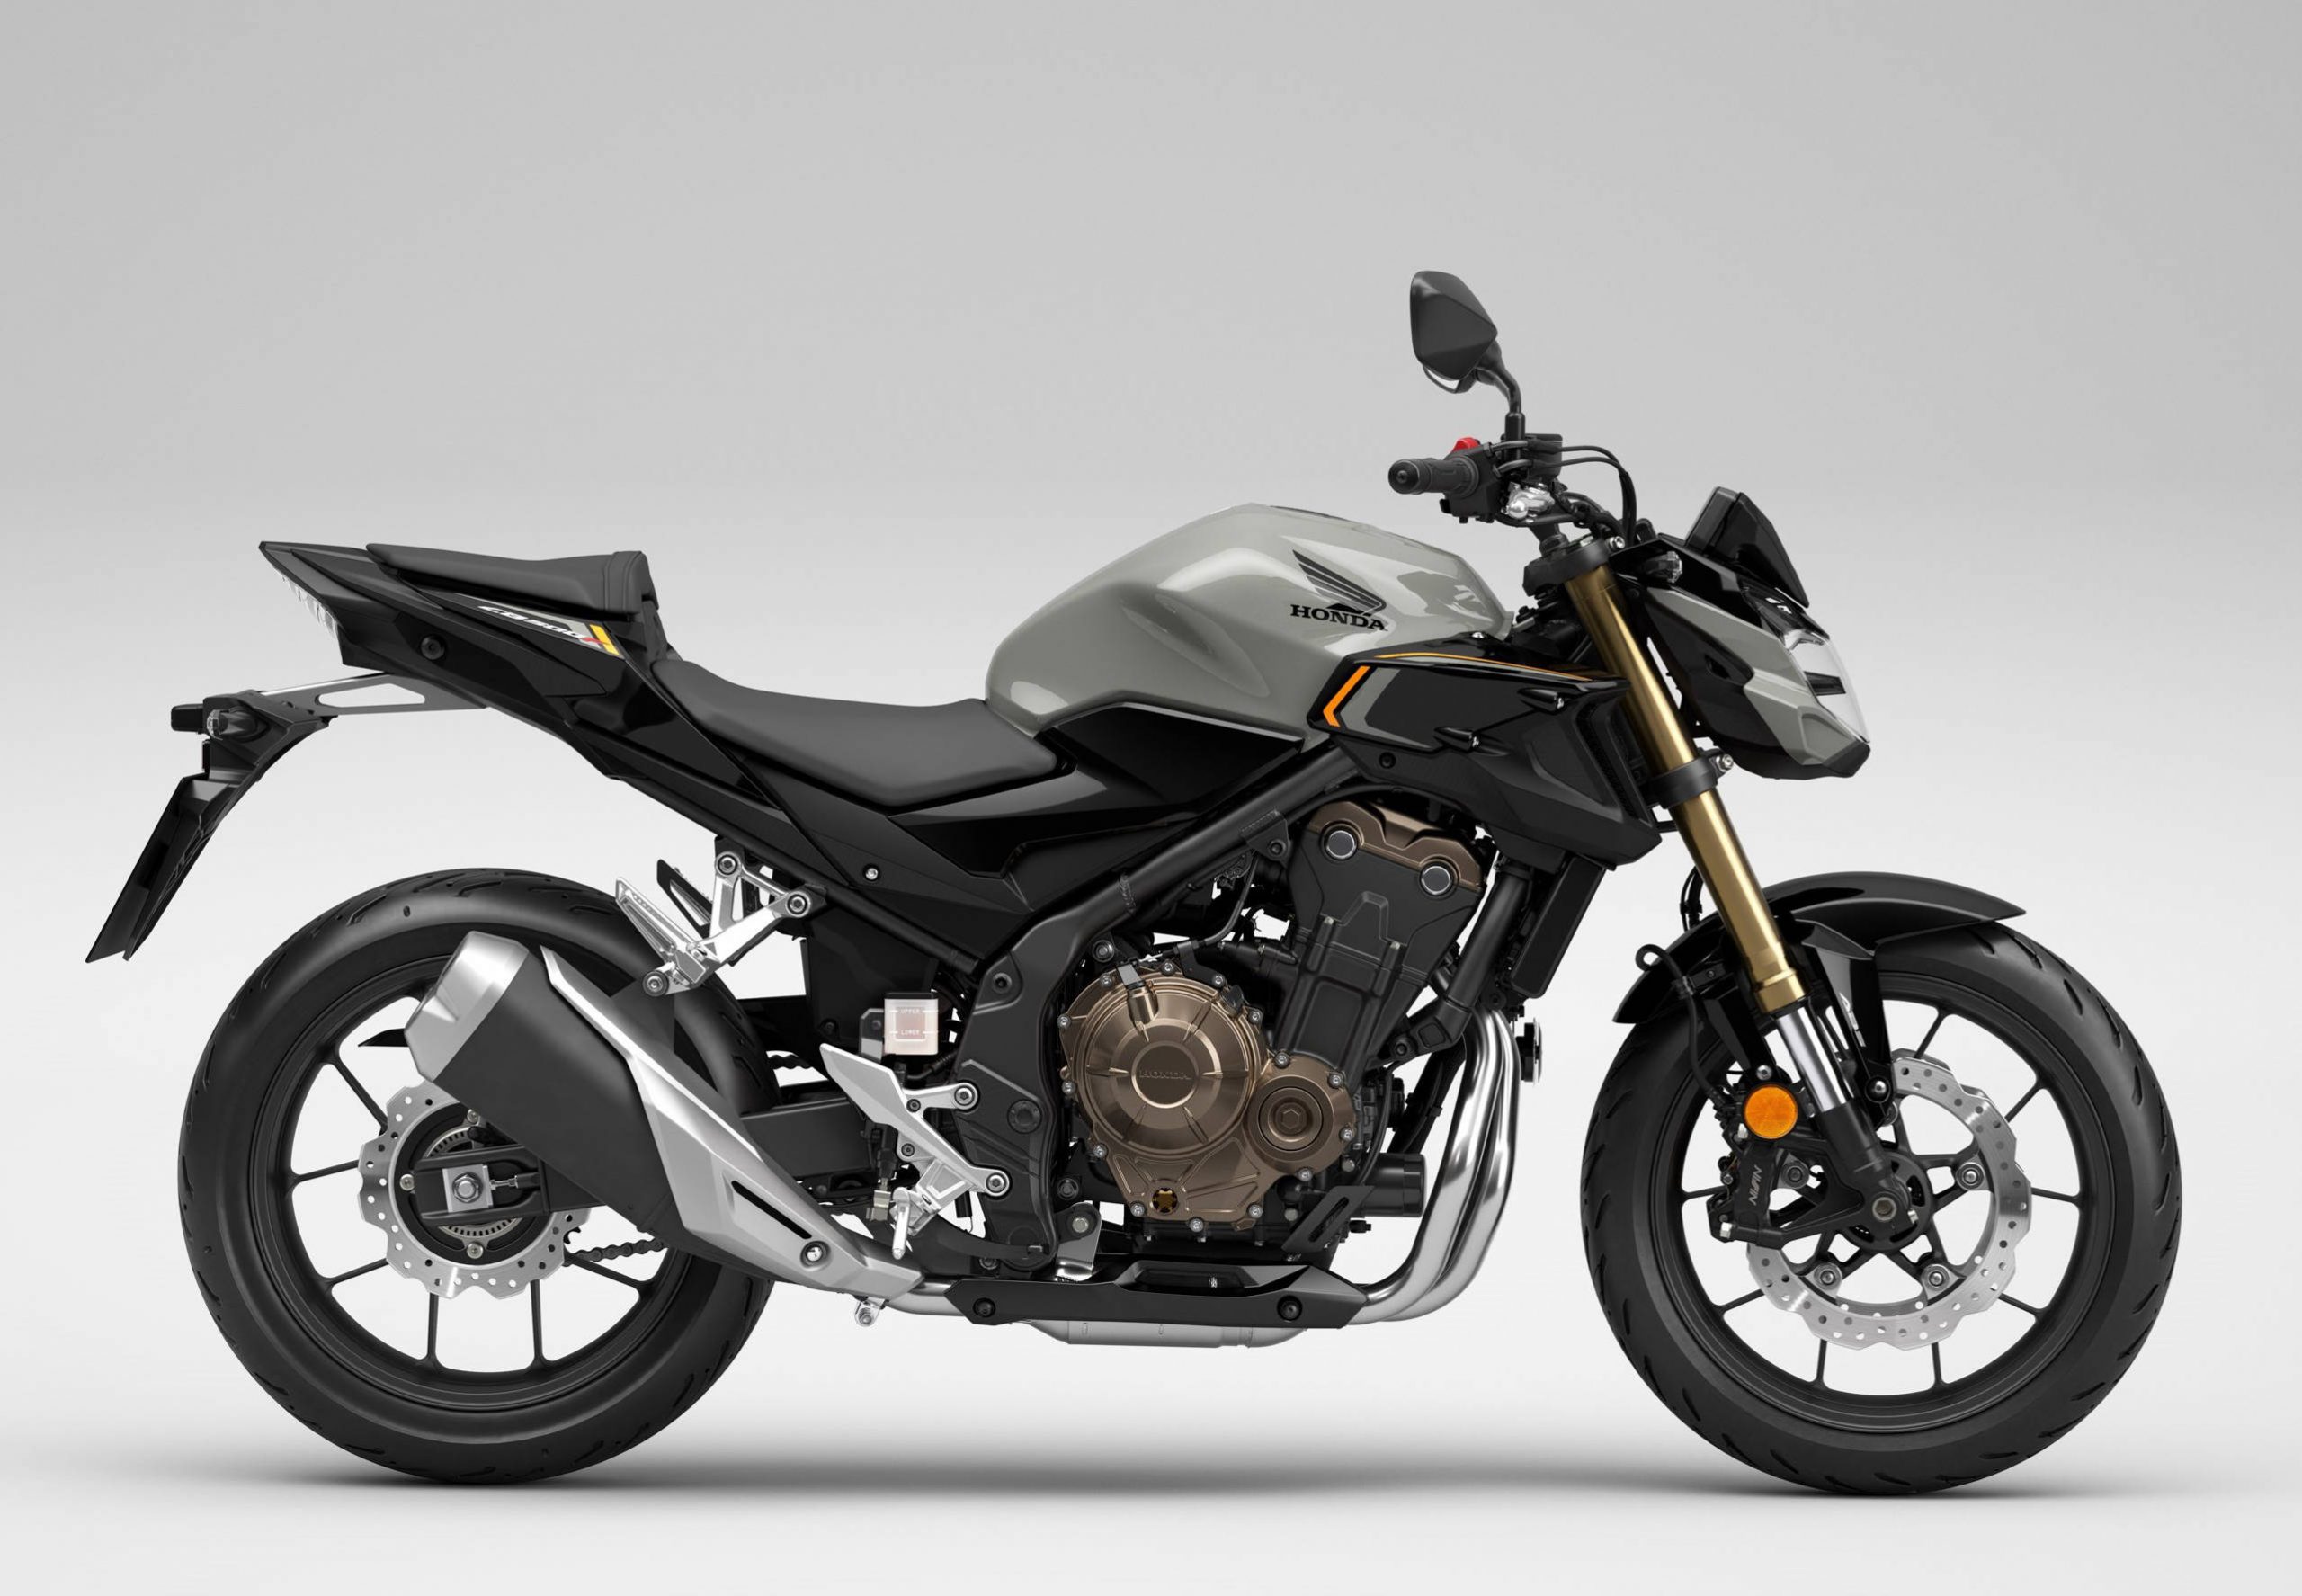 Honda Europe Announces Significant Changes to CB500F, CBR500R and CB500X for 2022. MotorcycleDaily.com News, Editorials, Product Reviews and Bike Reviews